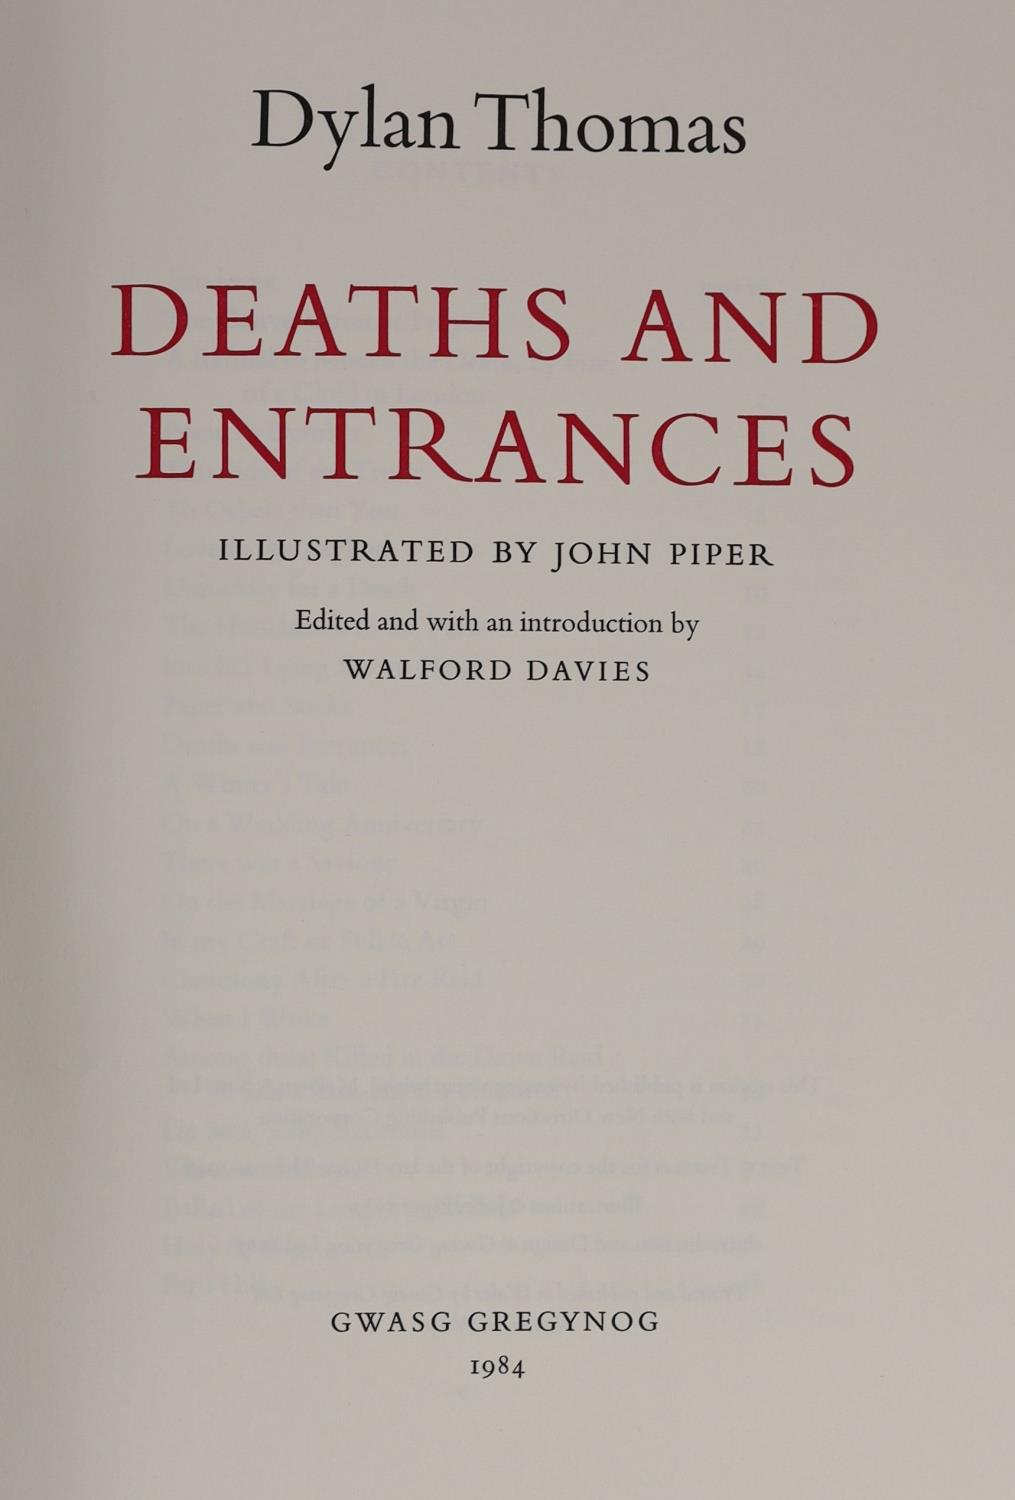 ° ° Thomas, Dylan - Deaths and Entrances, one of 250, edited by Walford Davies, illustrated by - Image 2 of 4